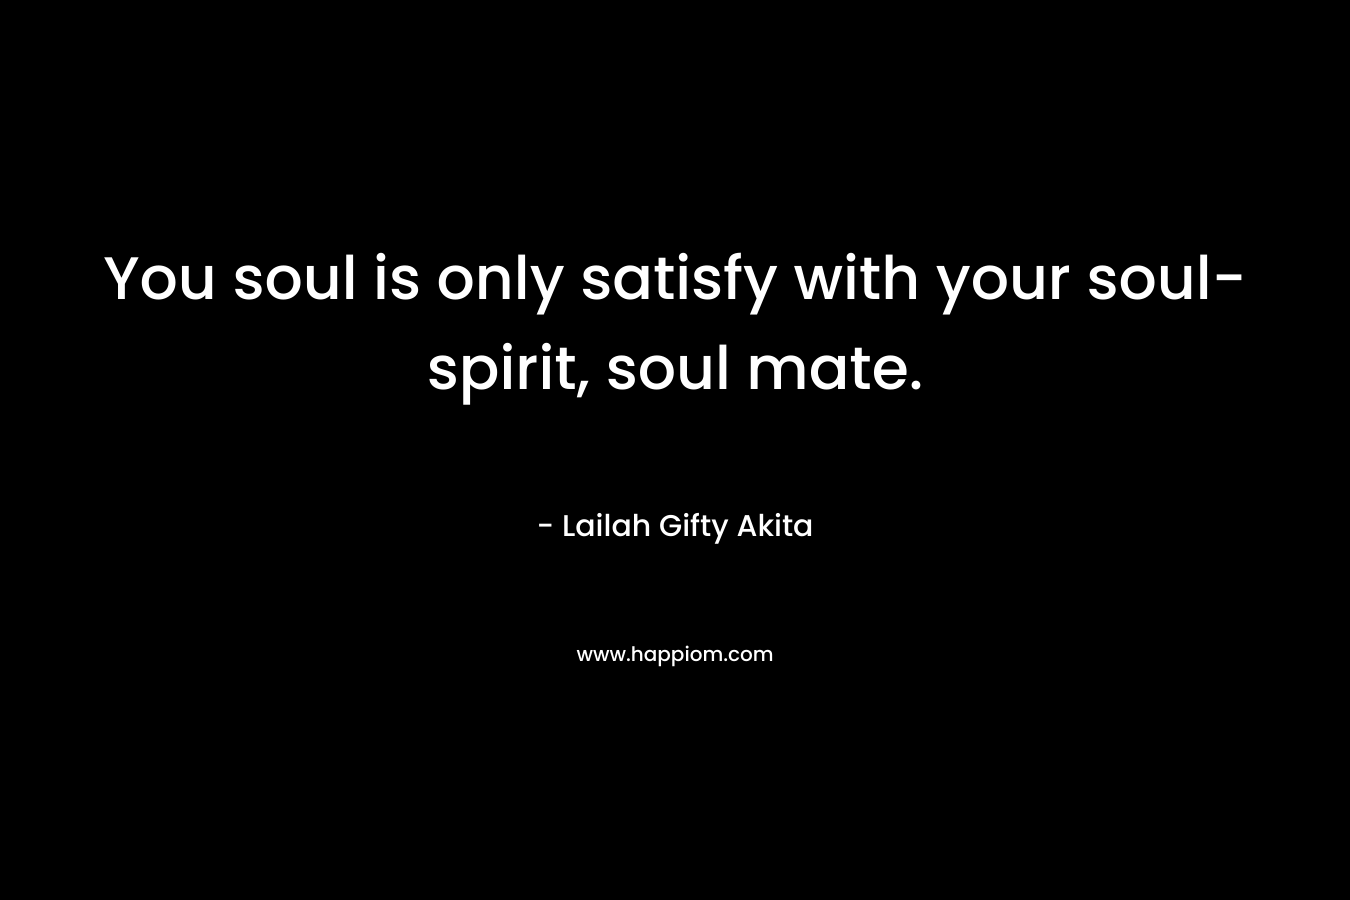 You soul is only satisfy with your soul-spirit, soul mate.